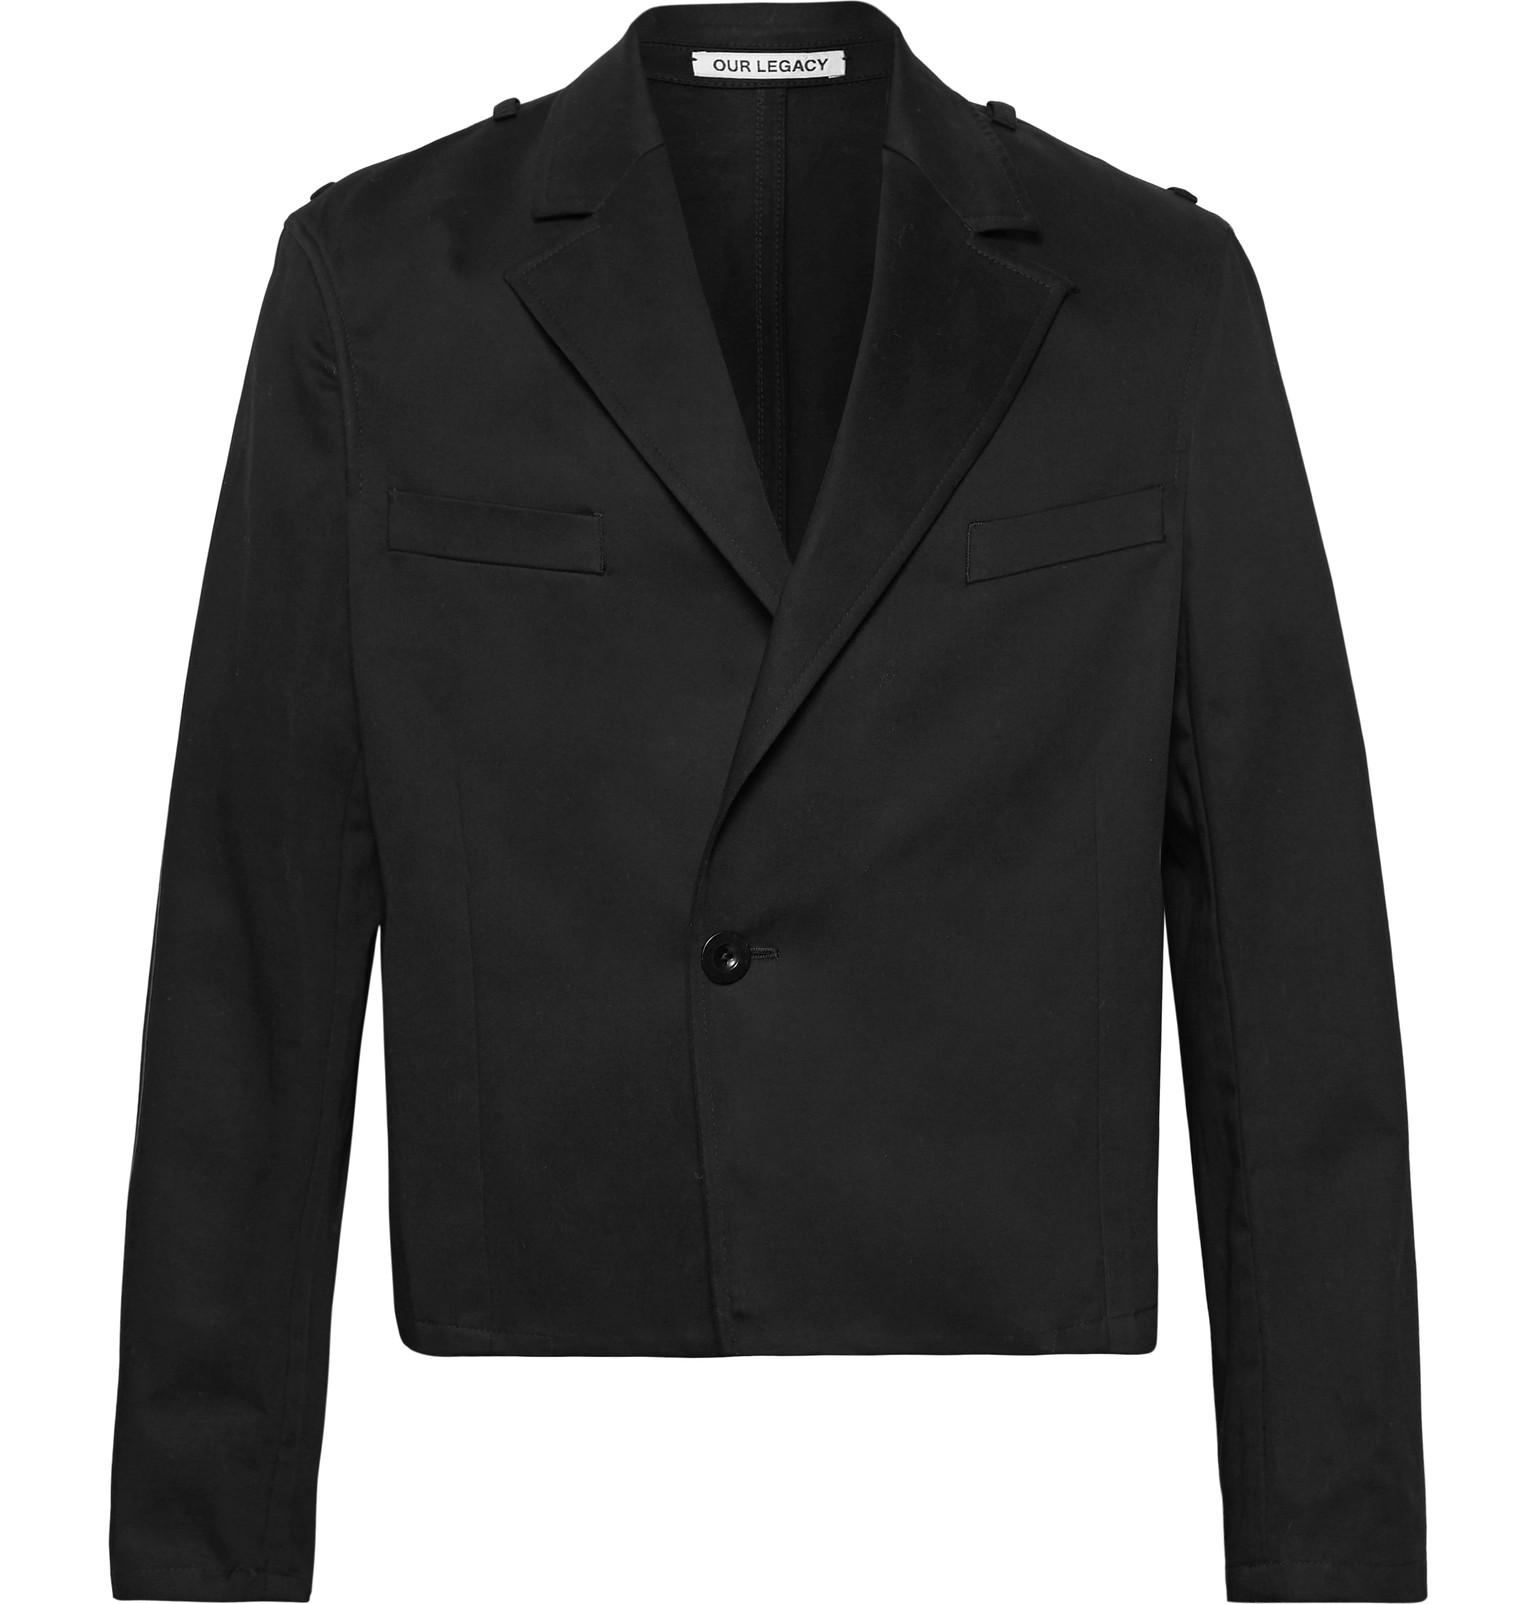 Our Legacy Cropped Cotton-twill Jacket in Black for Men - Lyst